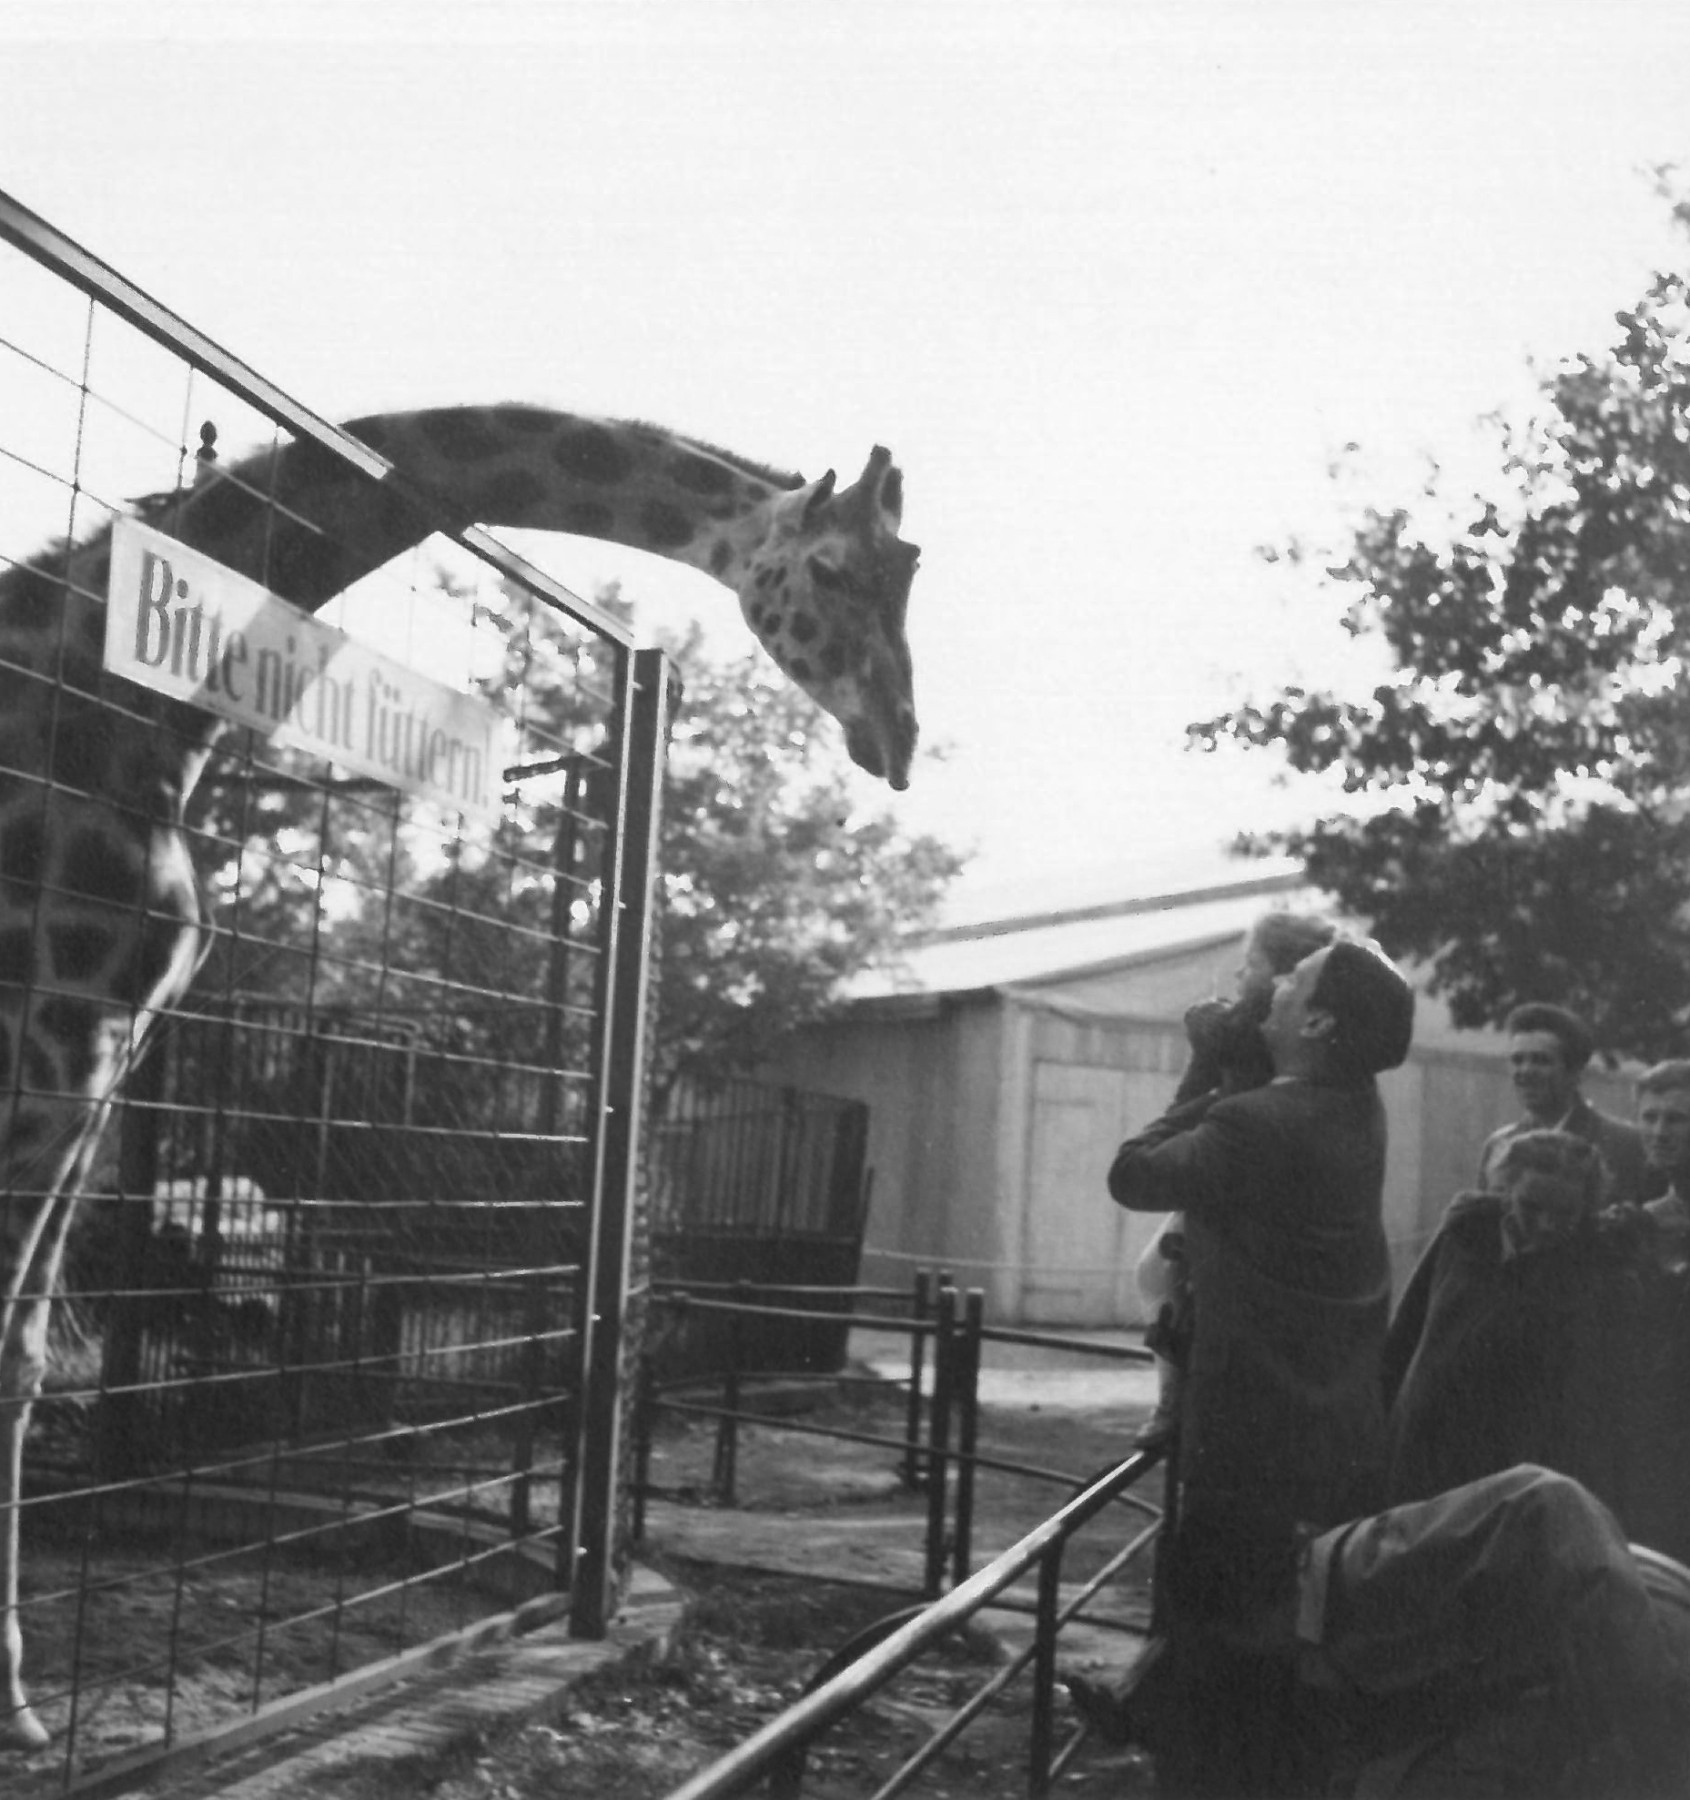 Giraffe enclosure with "Please do not feed" sign and metal barrier. A giraffe bends its head over the fence of the enclosure toward the visitors